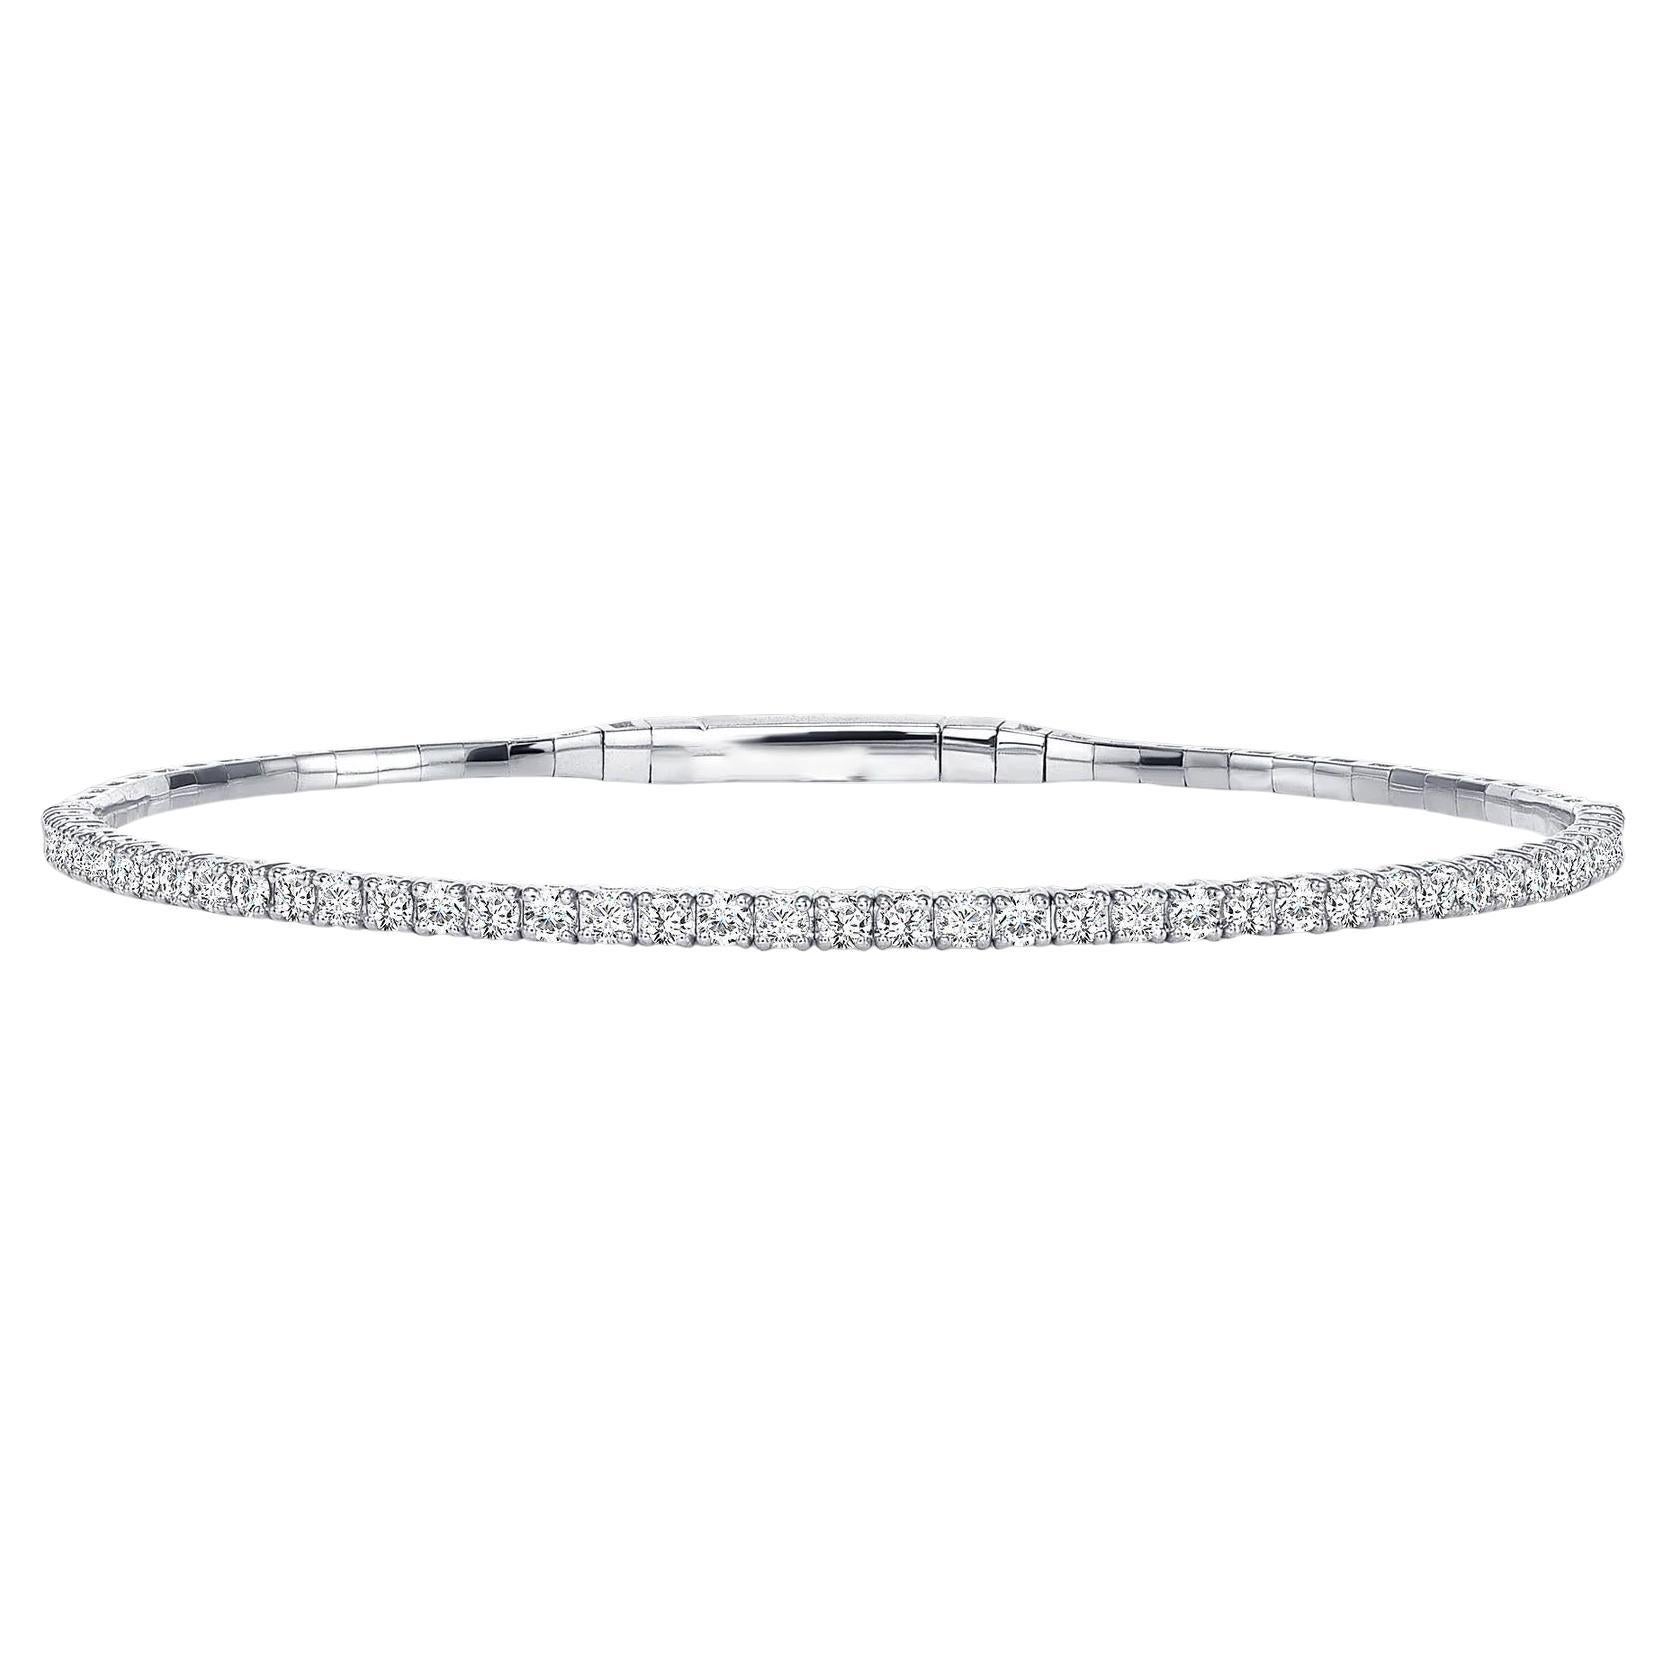 This diamond tennis bangle features beautifully cut round diamonds set gorgeously in 14k gold.

Bracelet Information
Metal : 14k Gold
Diamond Cut : Round Natural Diamond
Total Diamond Carats : 2ct
Diamond Clarity : VS -SI
Diamond Color : F-G
Color :